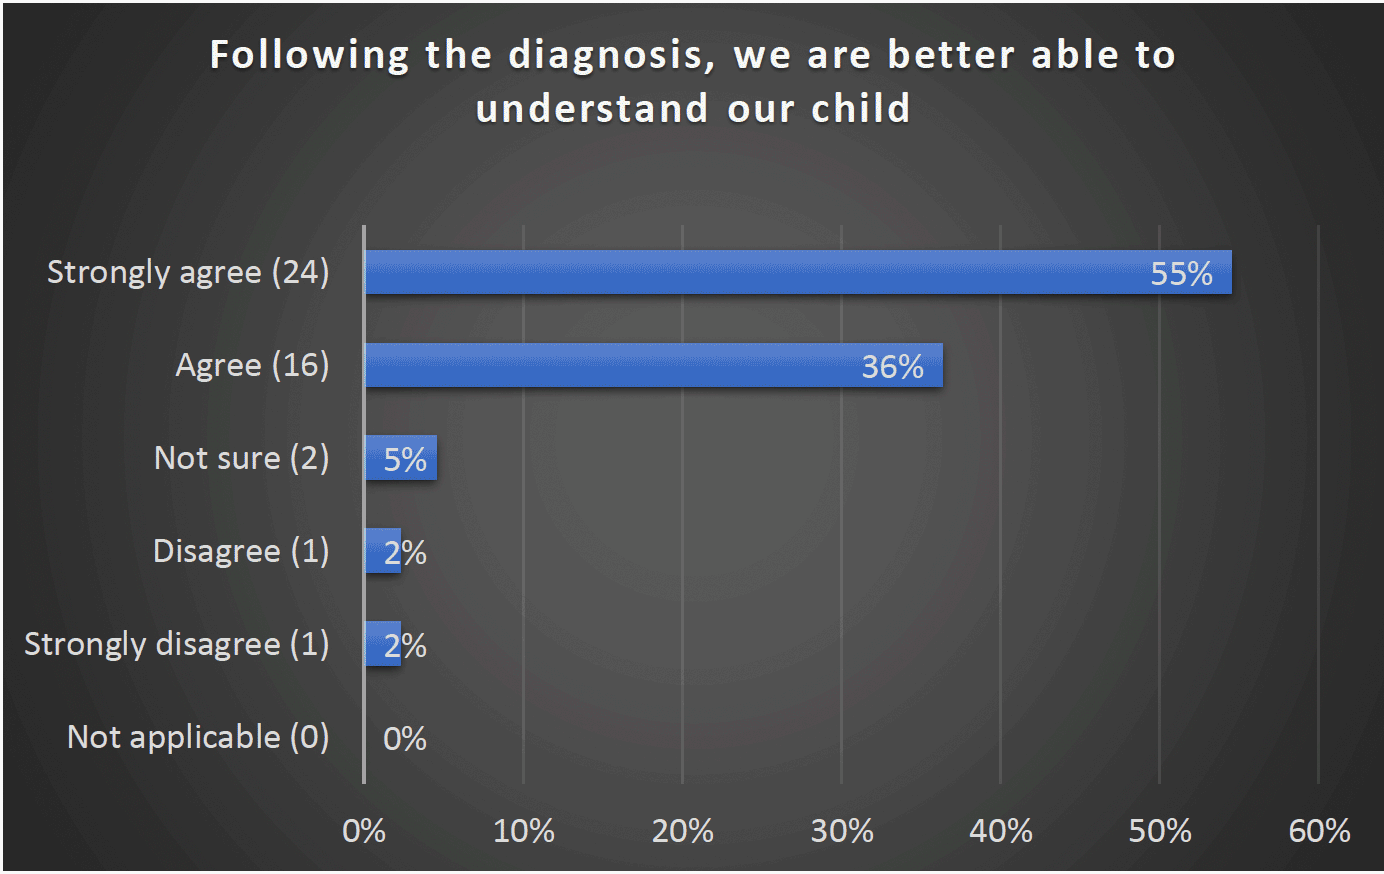 Following the diagnosis, we are better able to understand our child - Strongly agree (24) 55%, Agree (16) 36%, Not sure (2) 5%, Disagree (1) 2%, Strongly disagree (1) 2%